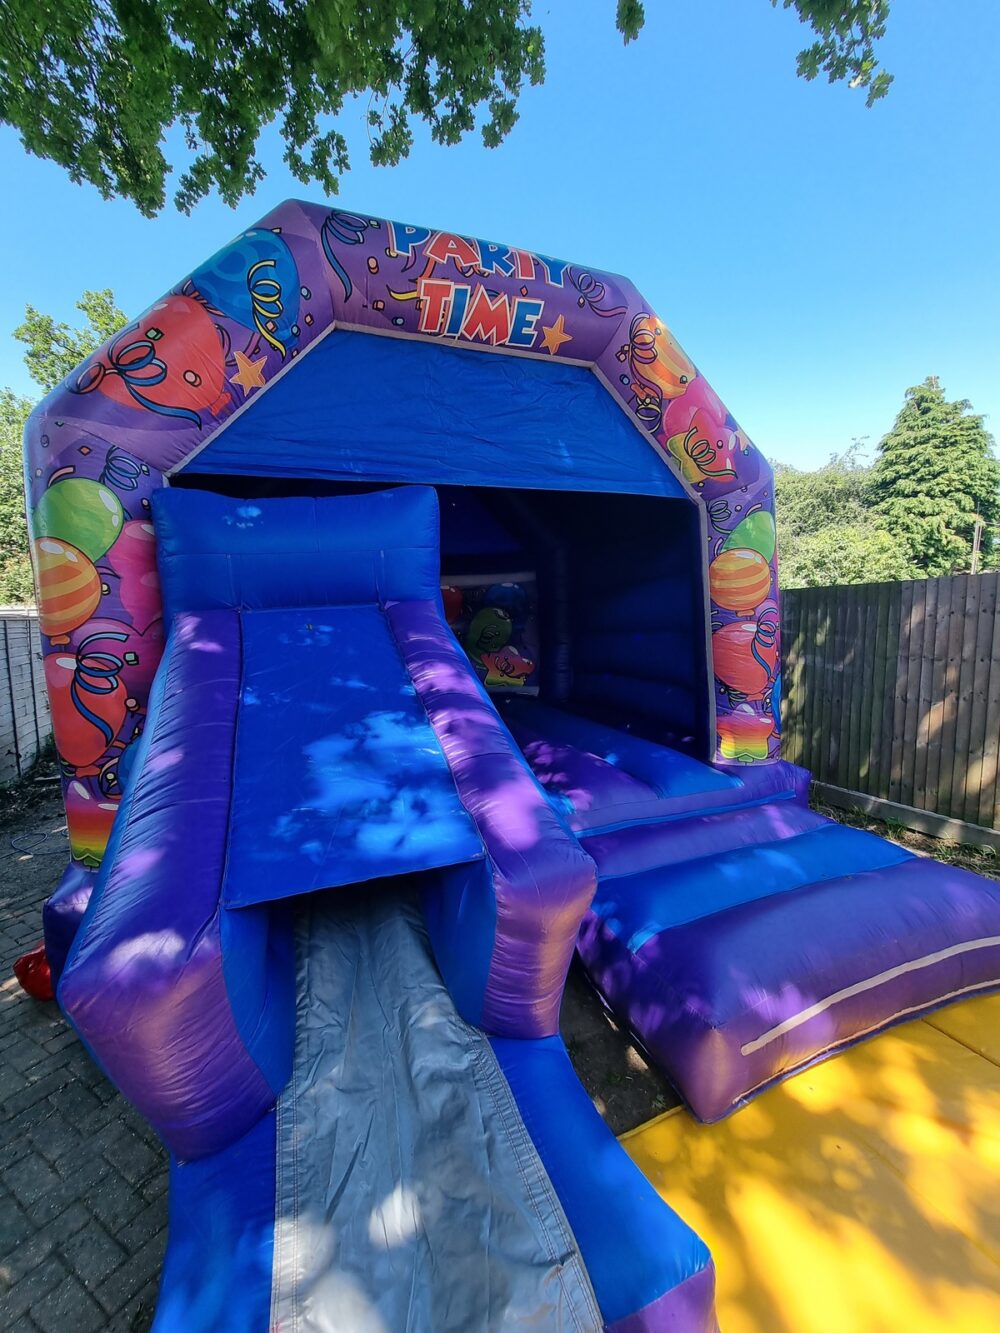 bouncy castle for adults, 5* party hire company, Sussex, Kent, Essex, London